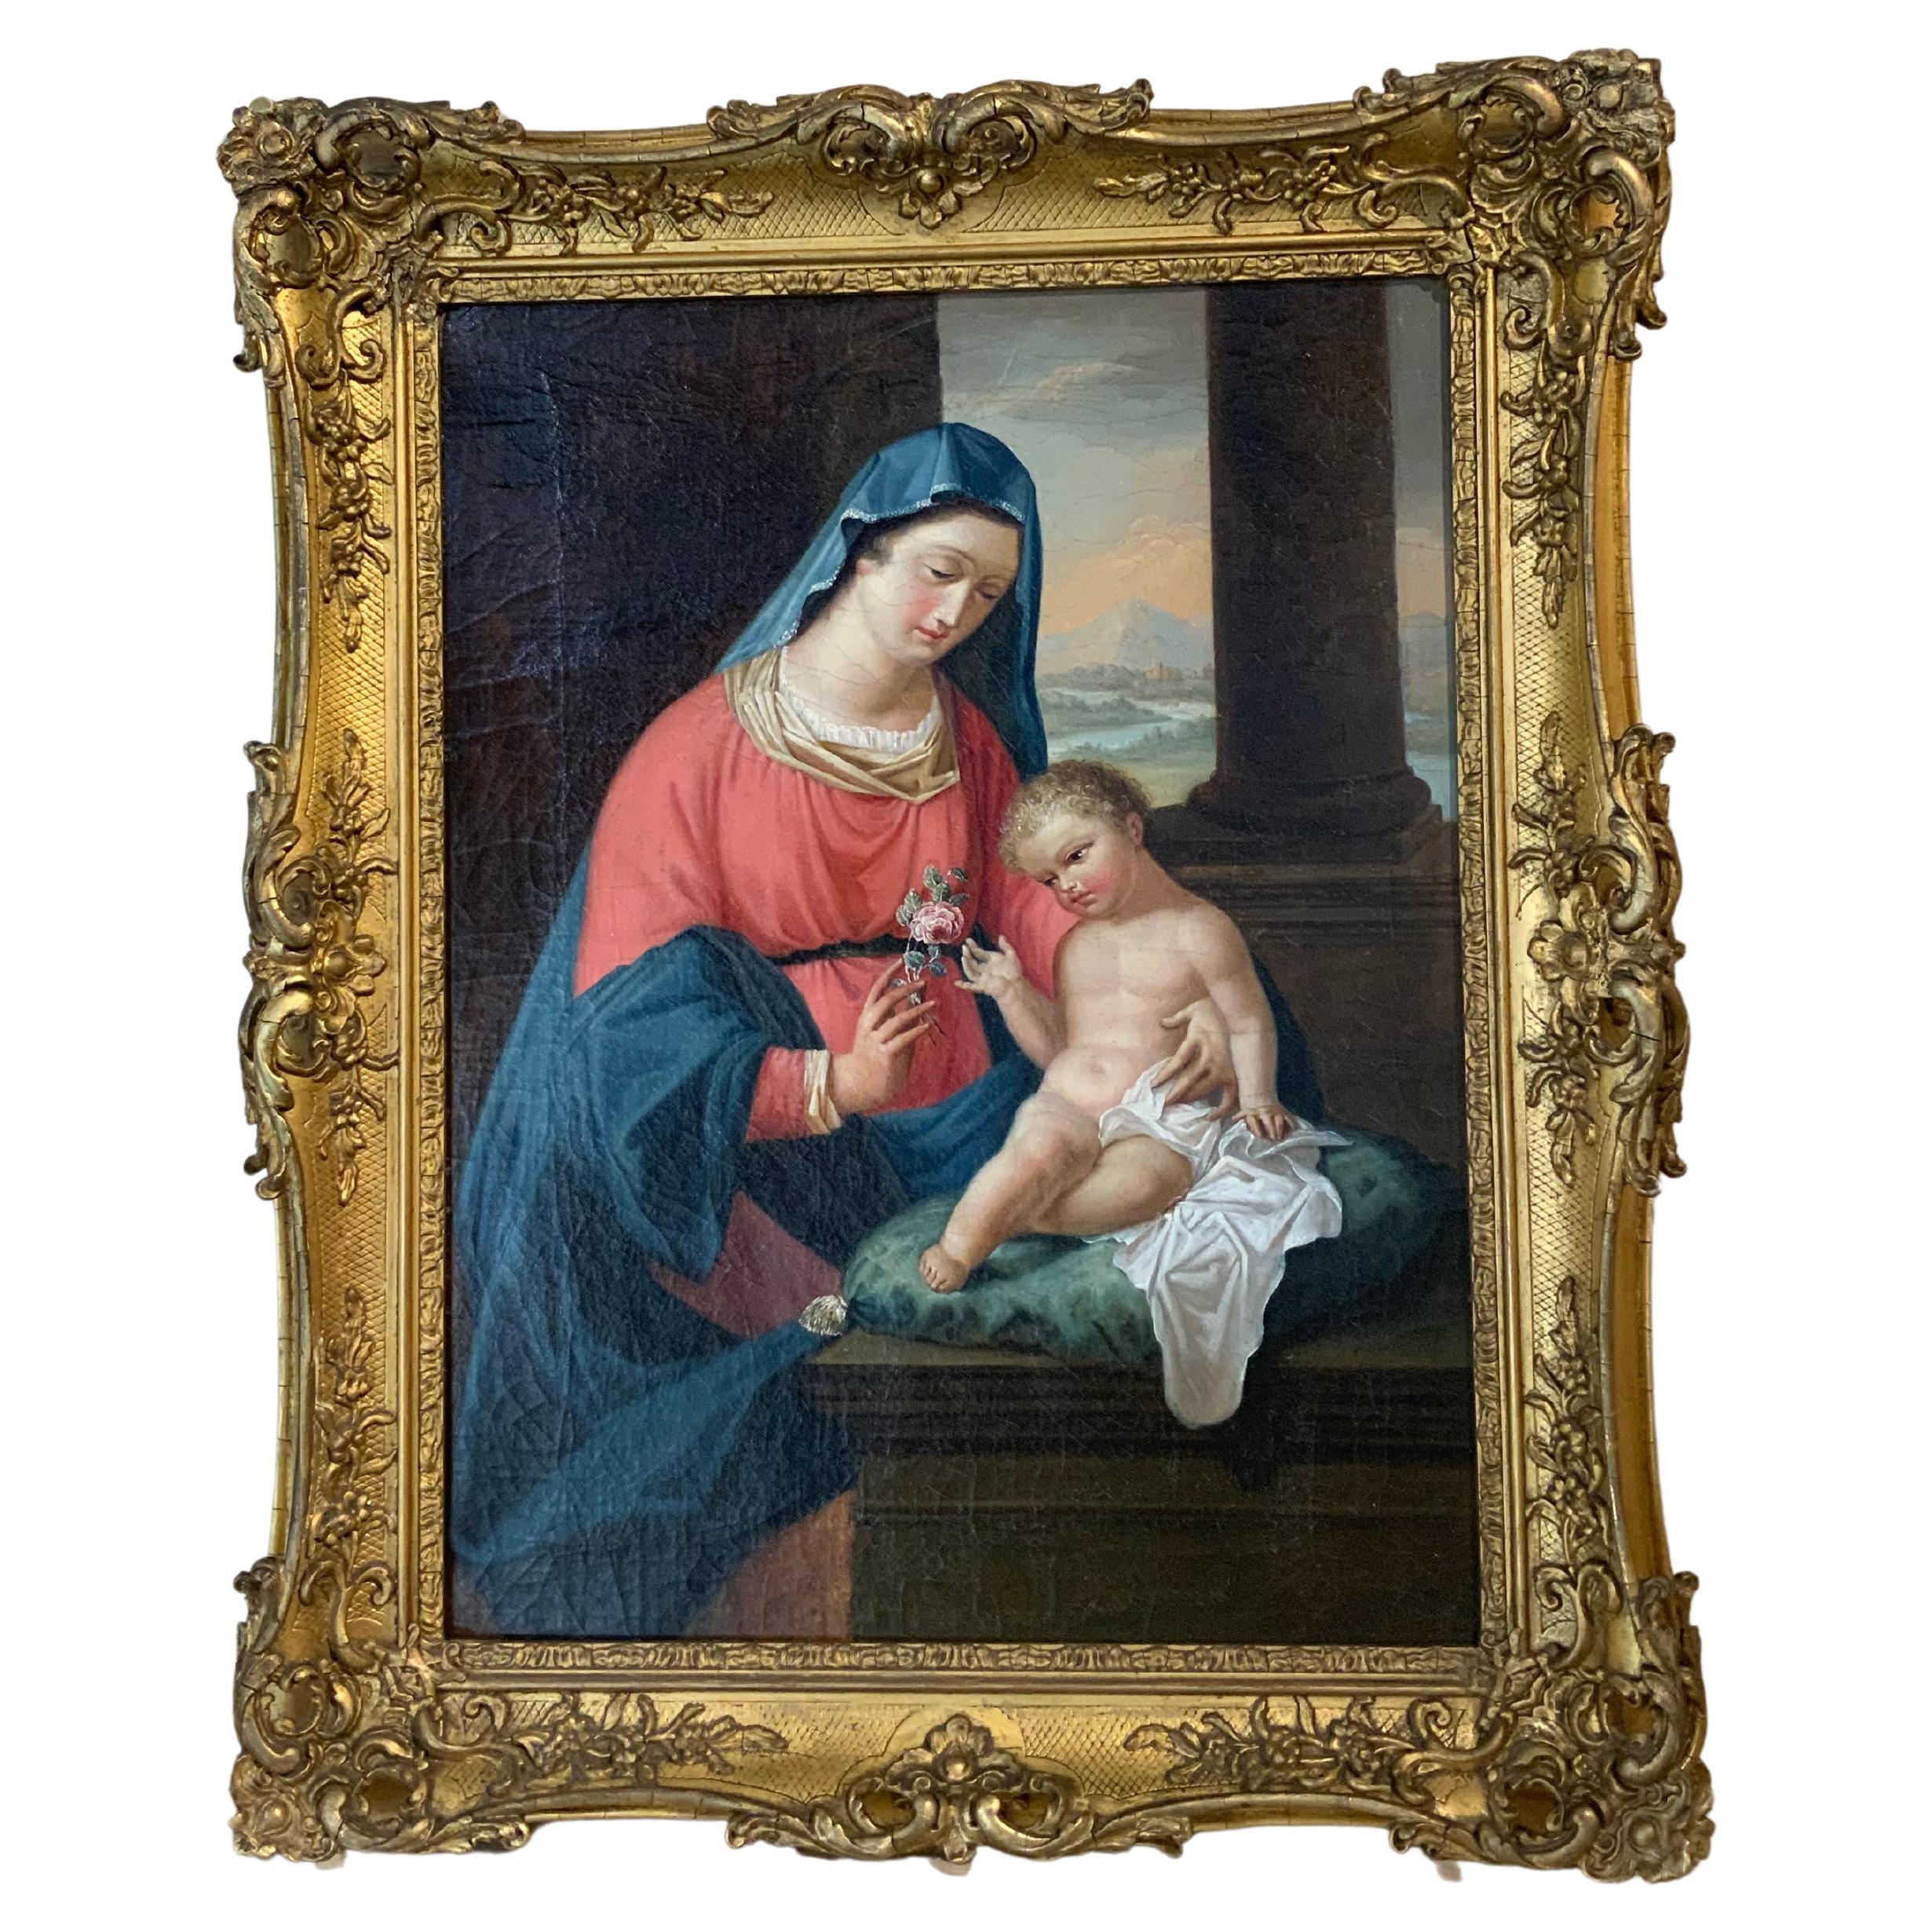 Religious Oil on Canvas 18th C. Virgin Mother and Christ Child “the Rose”